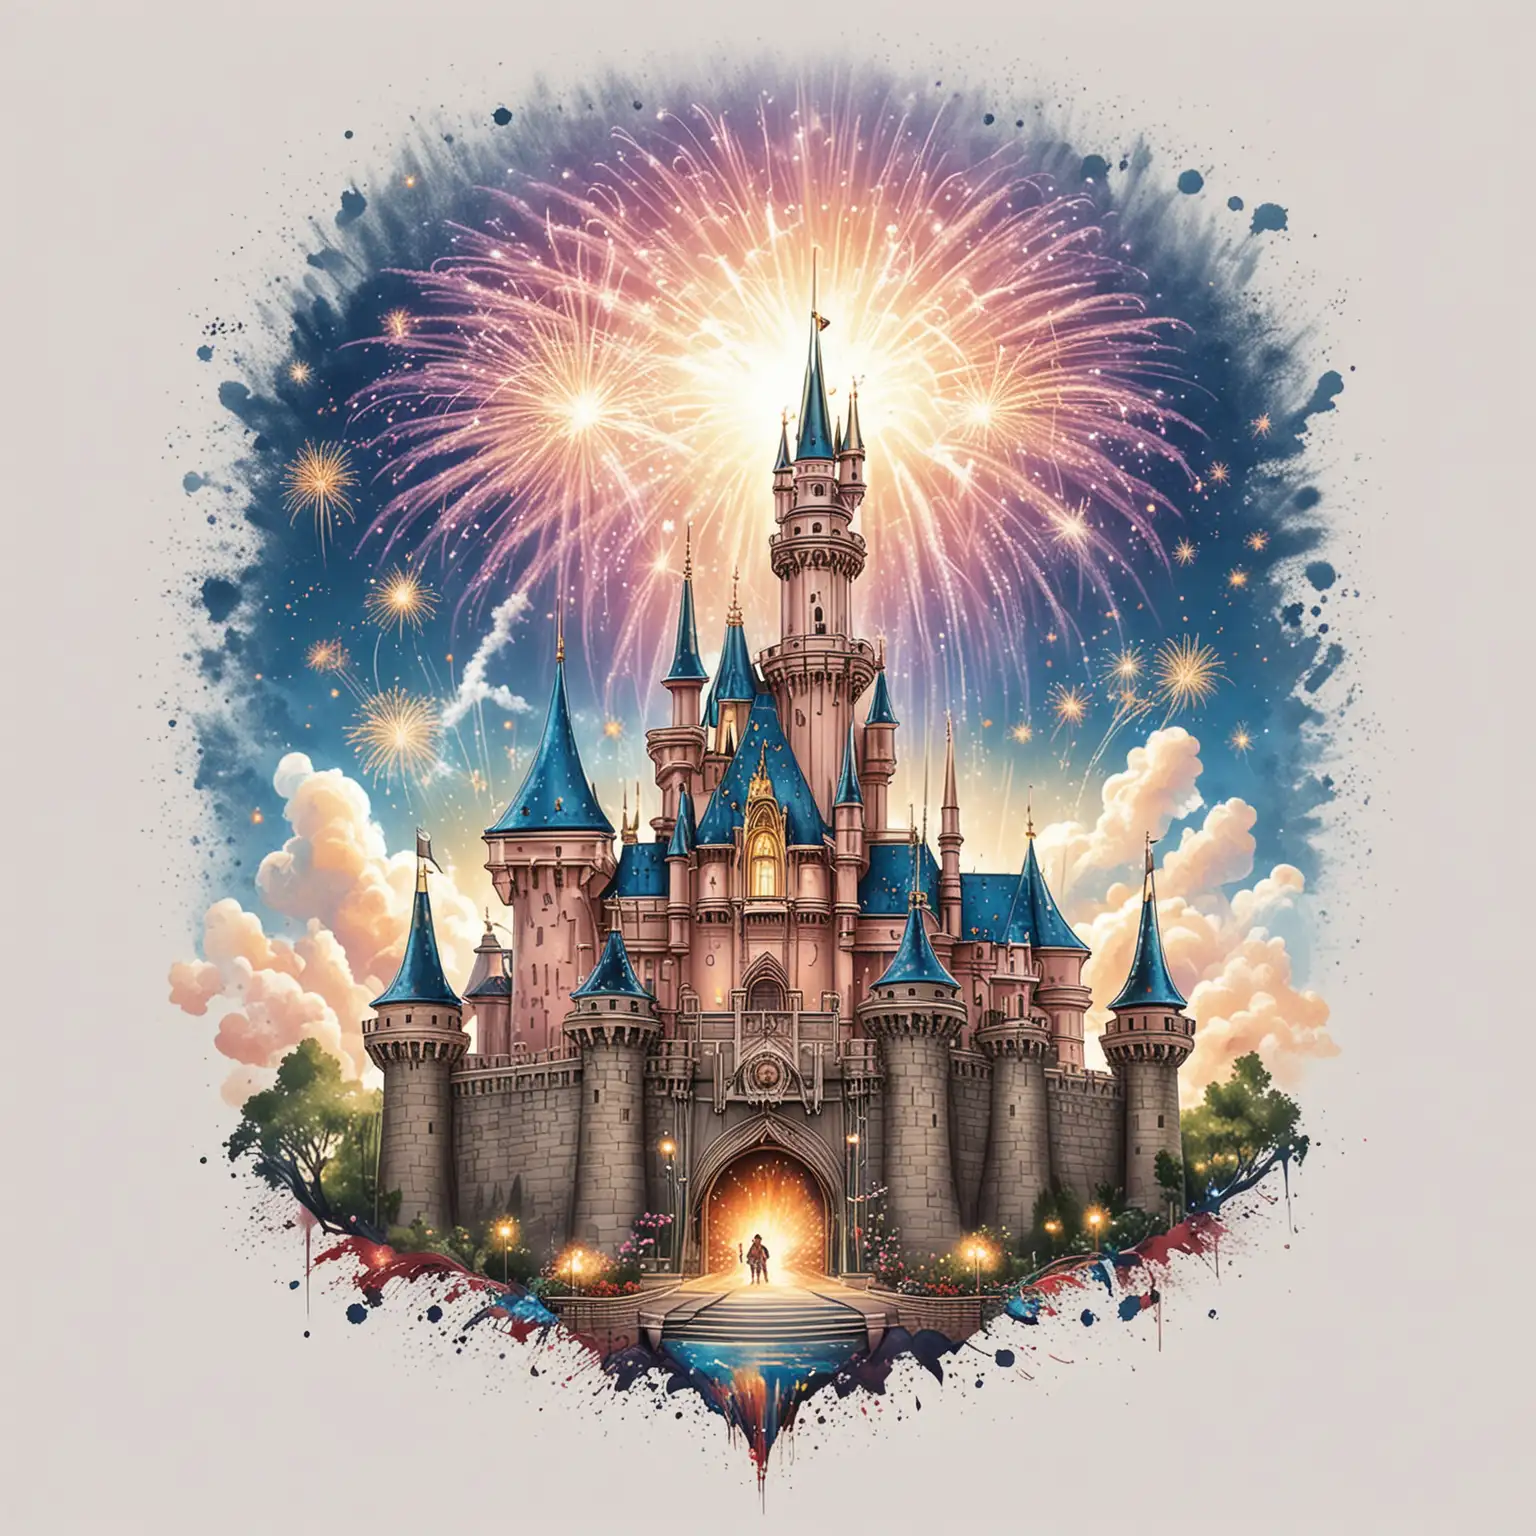 Sleeping Beauty Castle at Disneyland Anaheim with Large Fireworks Display